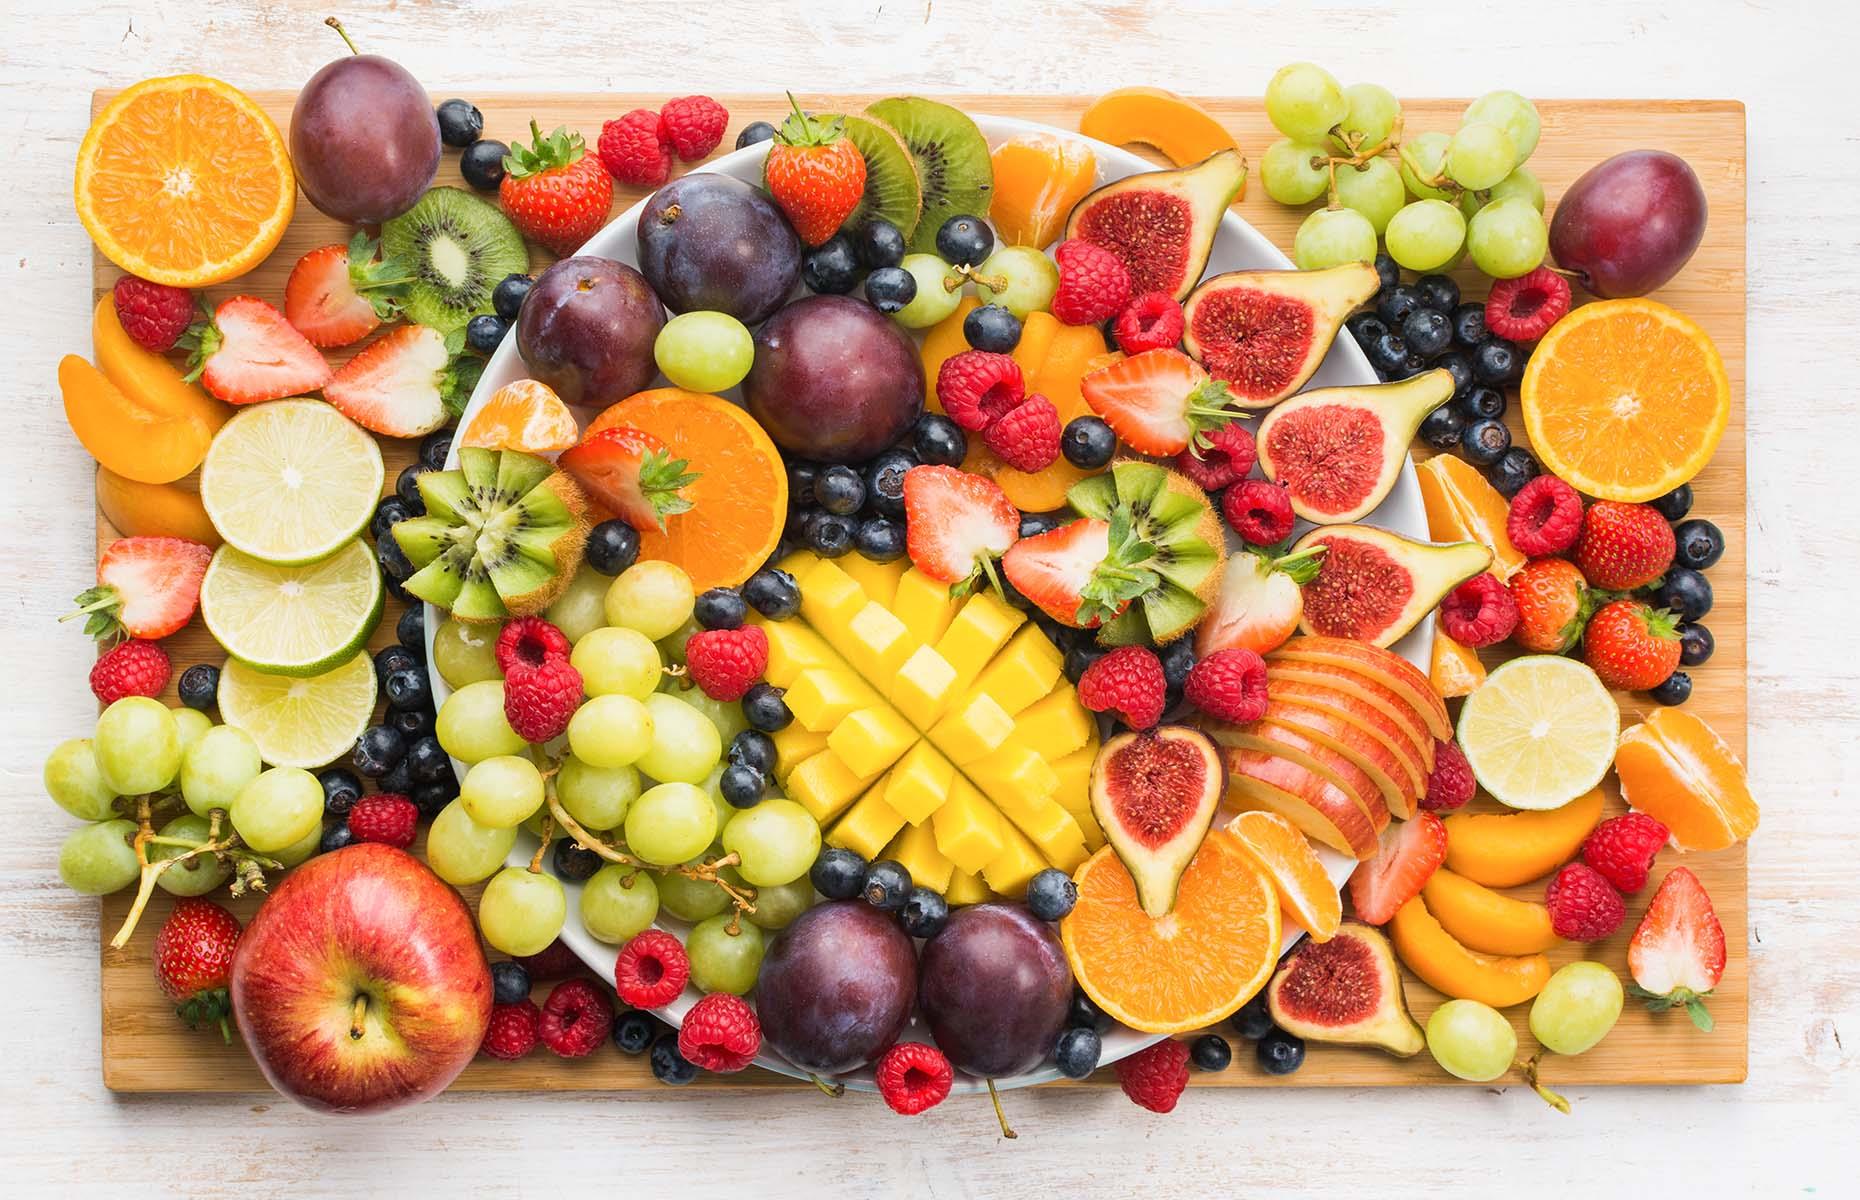 <p>A rainbow fruit salad board is a platter that's both tasty AND healthy. Use cookie cutters to shape the fruits, arrange them by color, or simply scatter them however you think looks best. For even more deliciousness, pair your spread with melted chocolate or caramel sauce, or try grilling some of your fruits to amp up the flavors.</p>  <p><a href="https://www.lovefood.com/recipes/87485/griddled-pineapple-with-salted-caramel-recipe"><strong>Get the recipe for griddled pineapple with salted caramel here</strong></a></p>